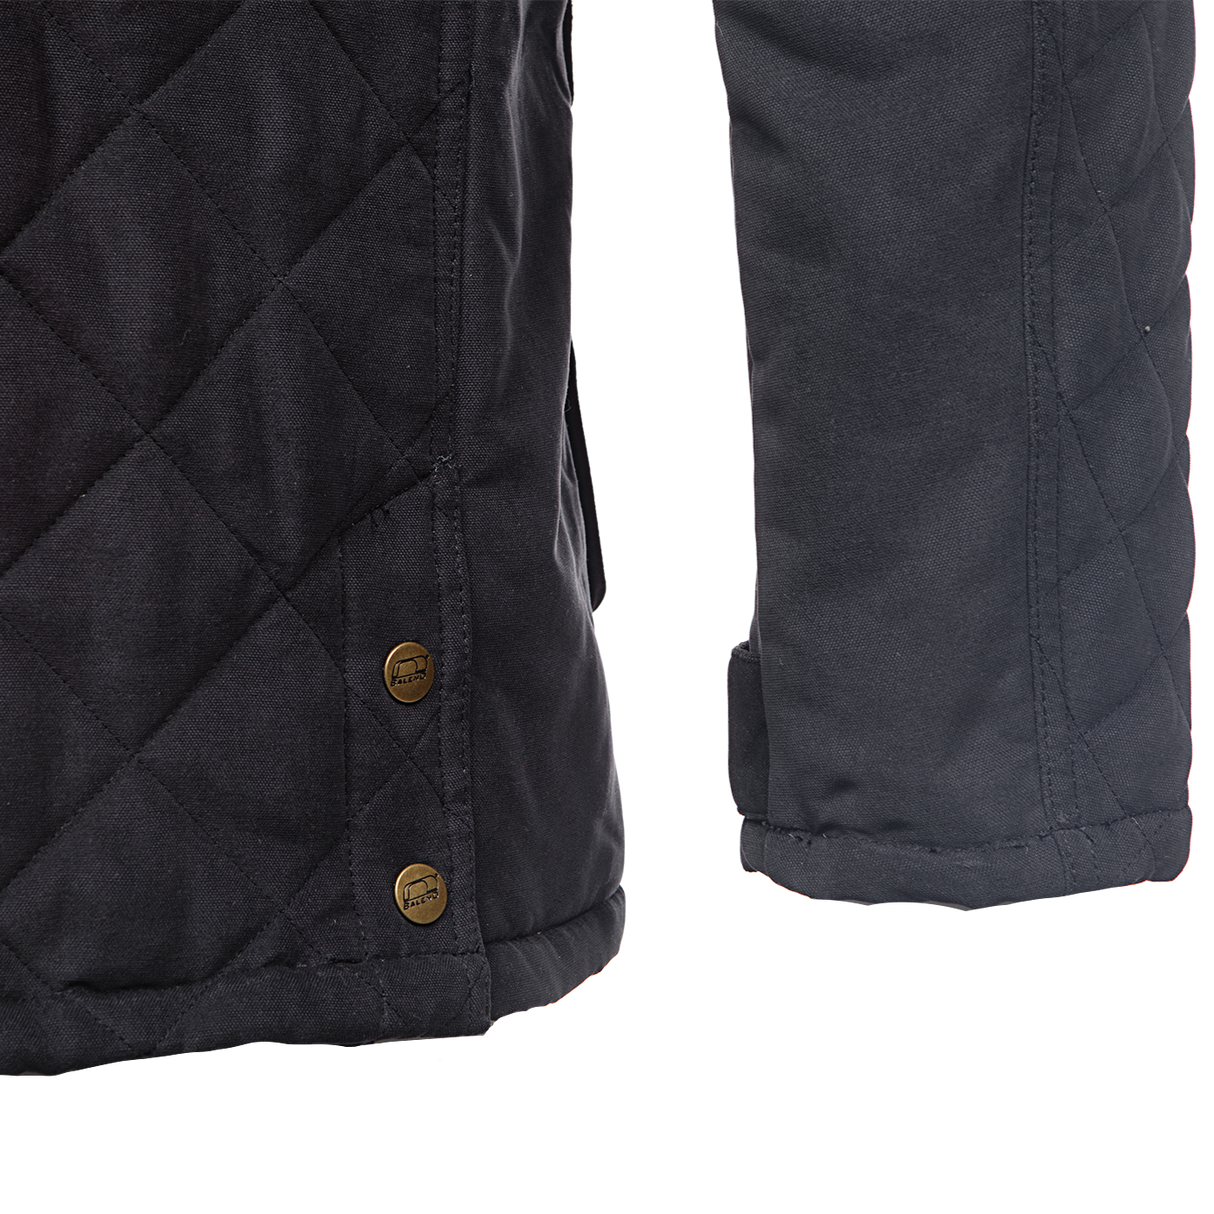 Baleno Goodwood Mens Stylish Quilted Jacket #colour_navy-blue